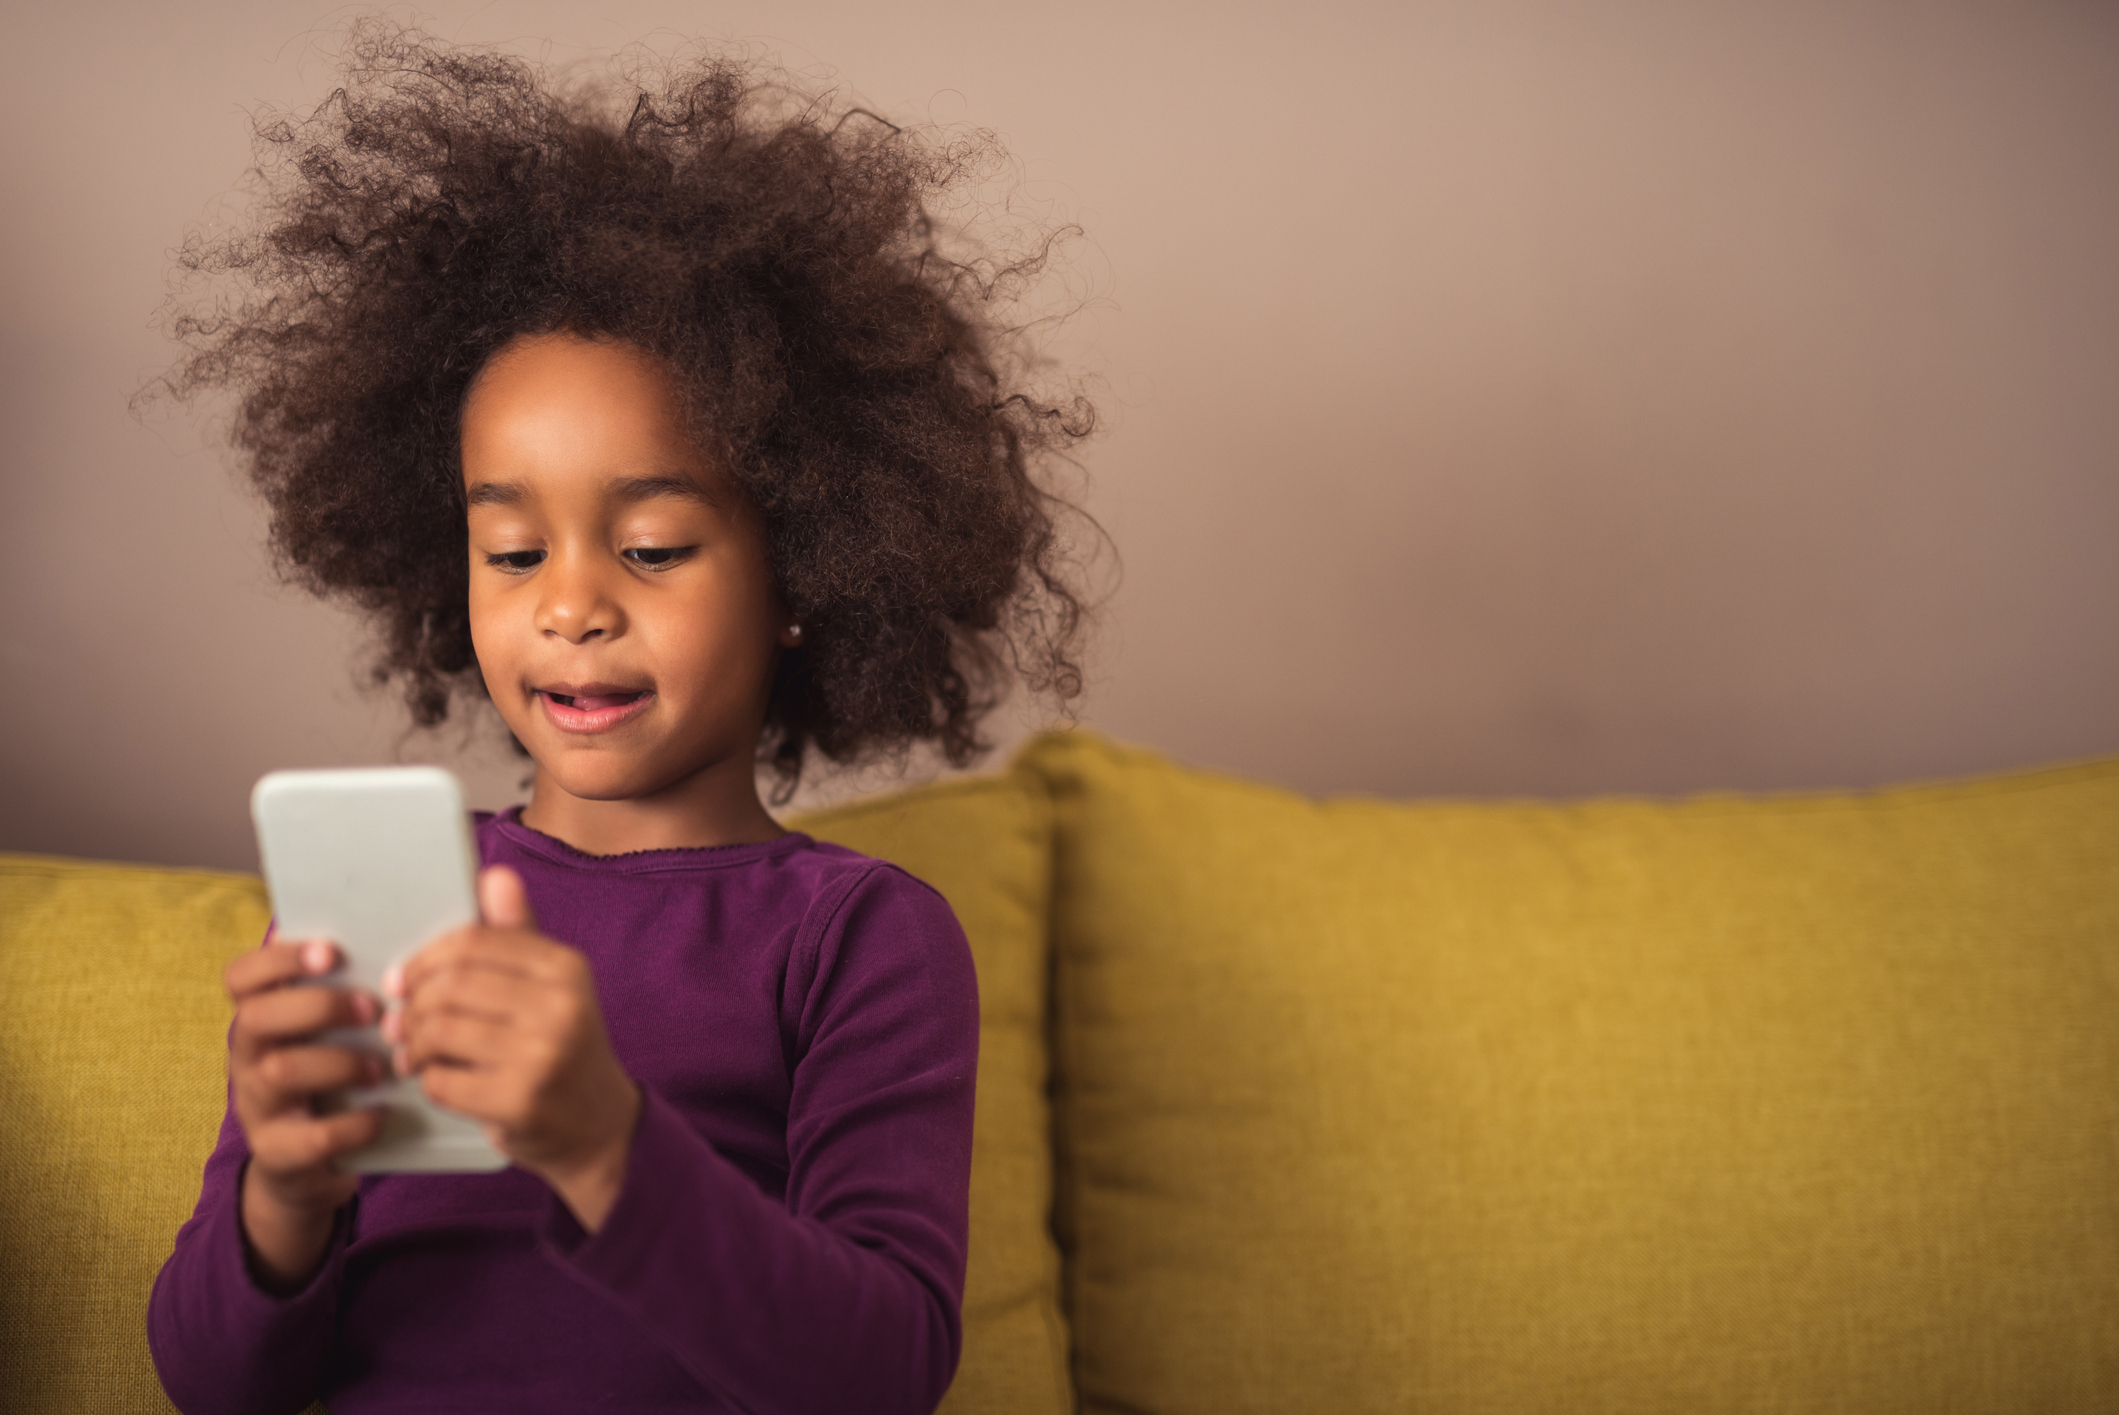 A child sitting on a sofa using a mobile phone